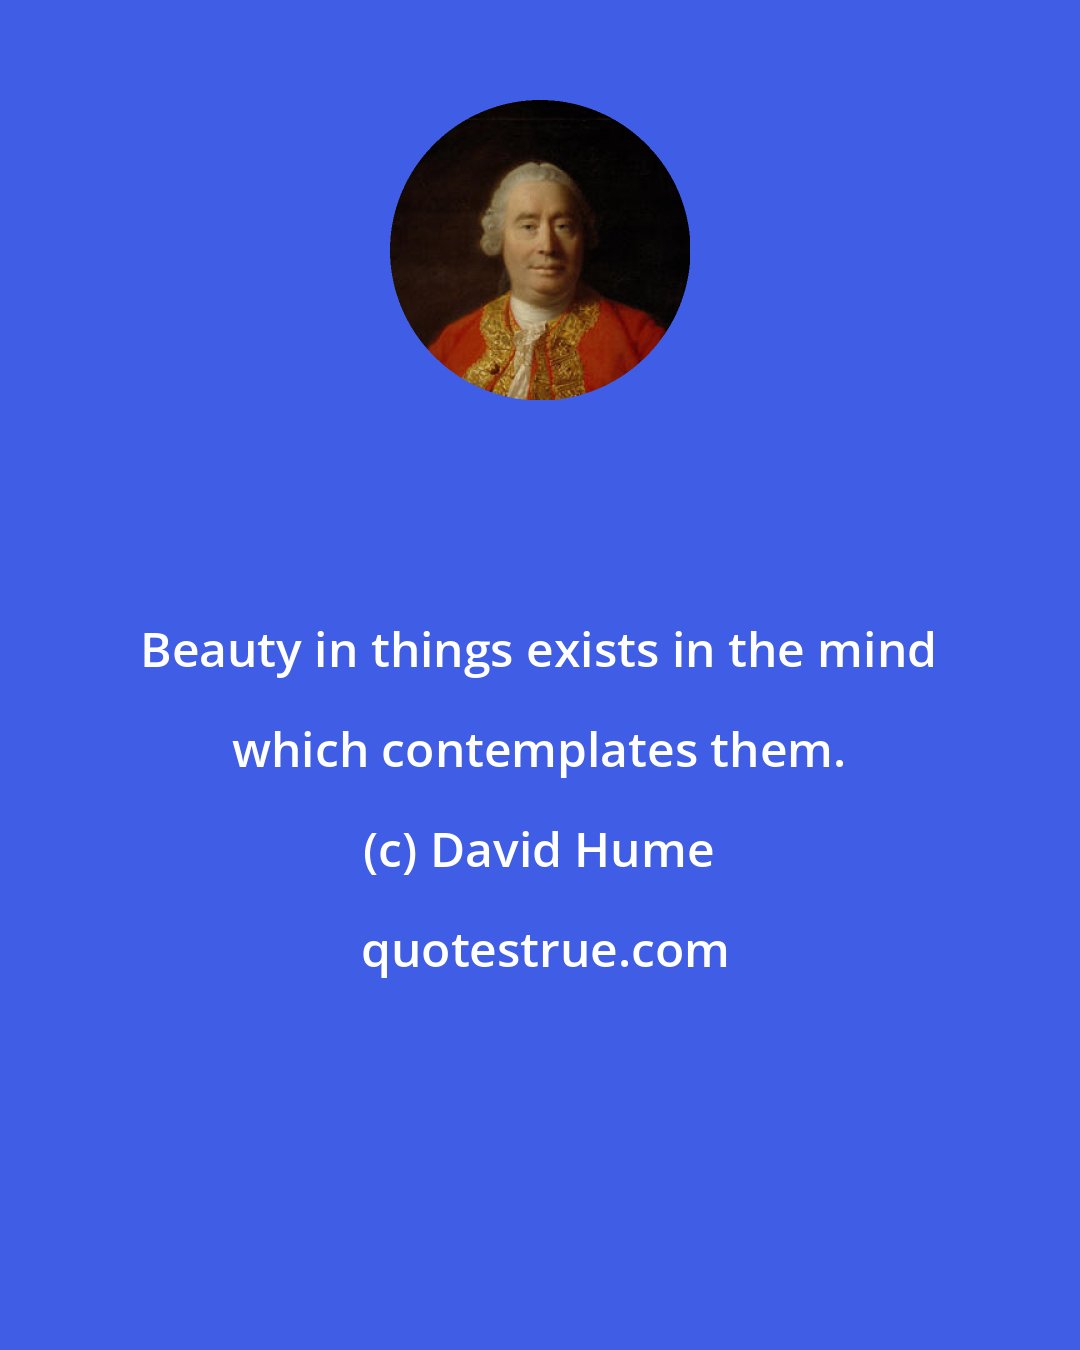 David Hume: Beauty in things exists in the mind which contemplates them.